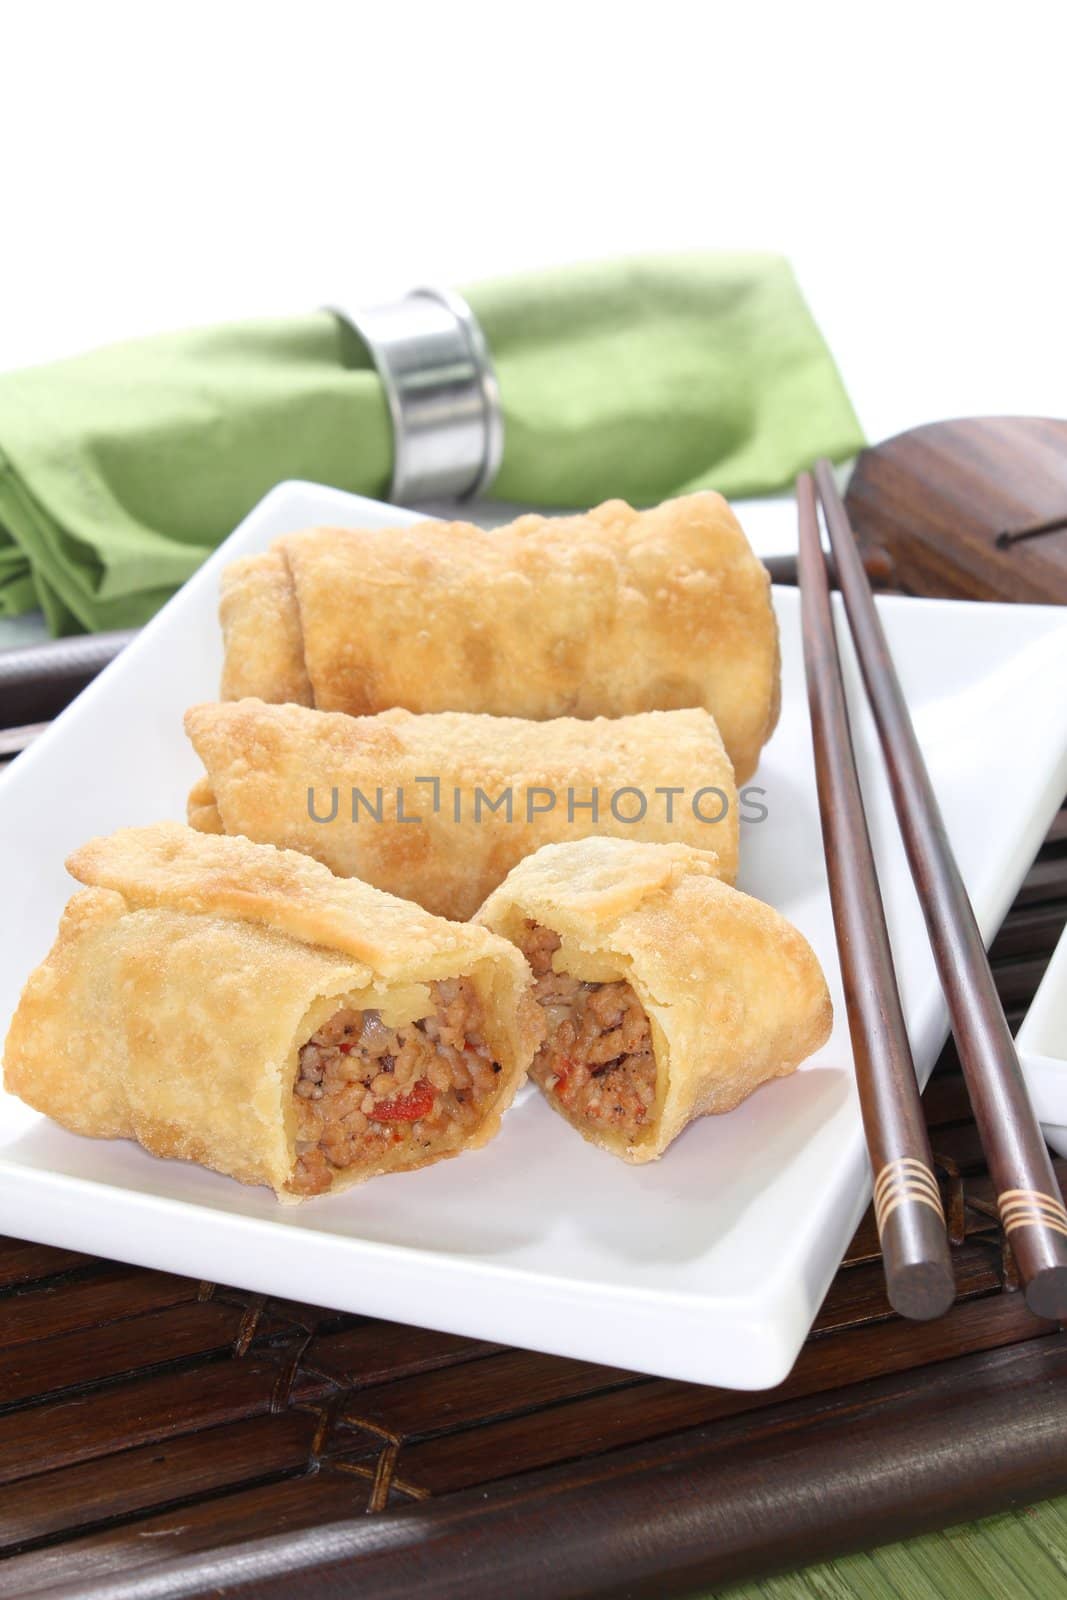 Spring rolls by discovery